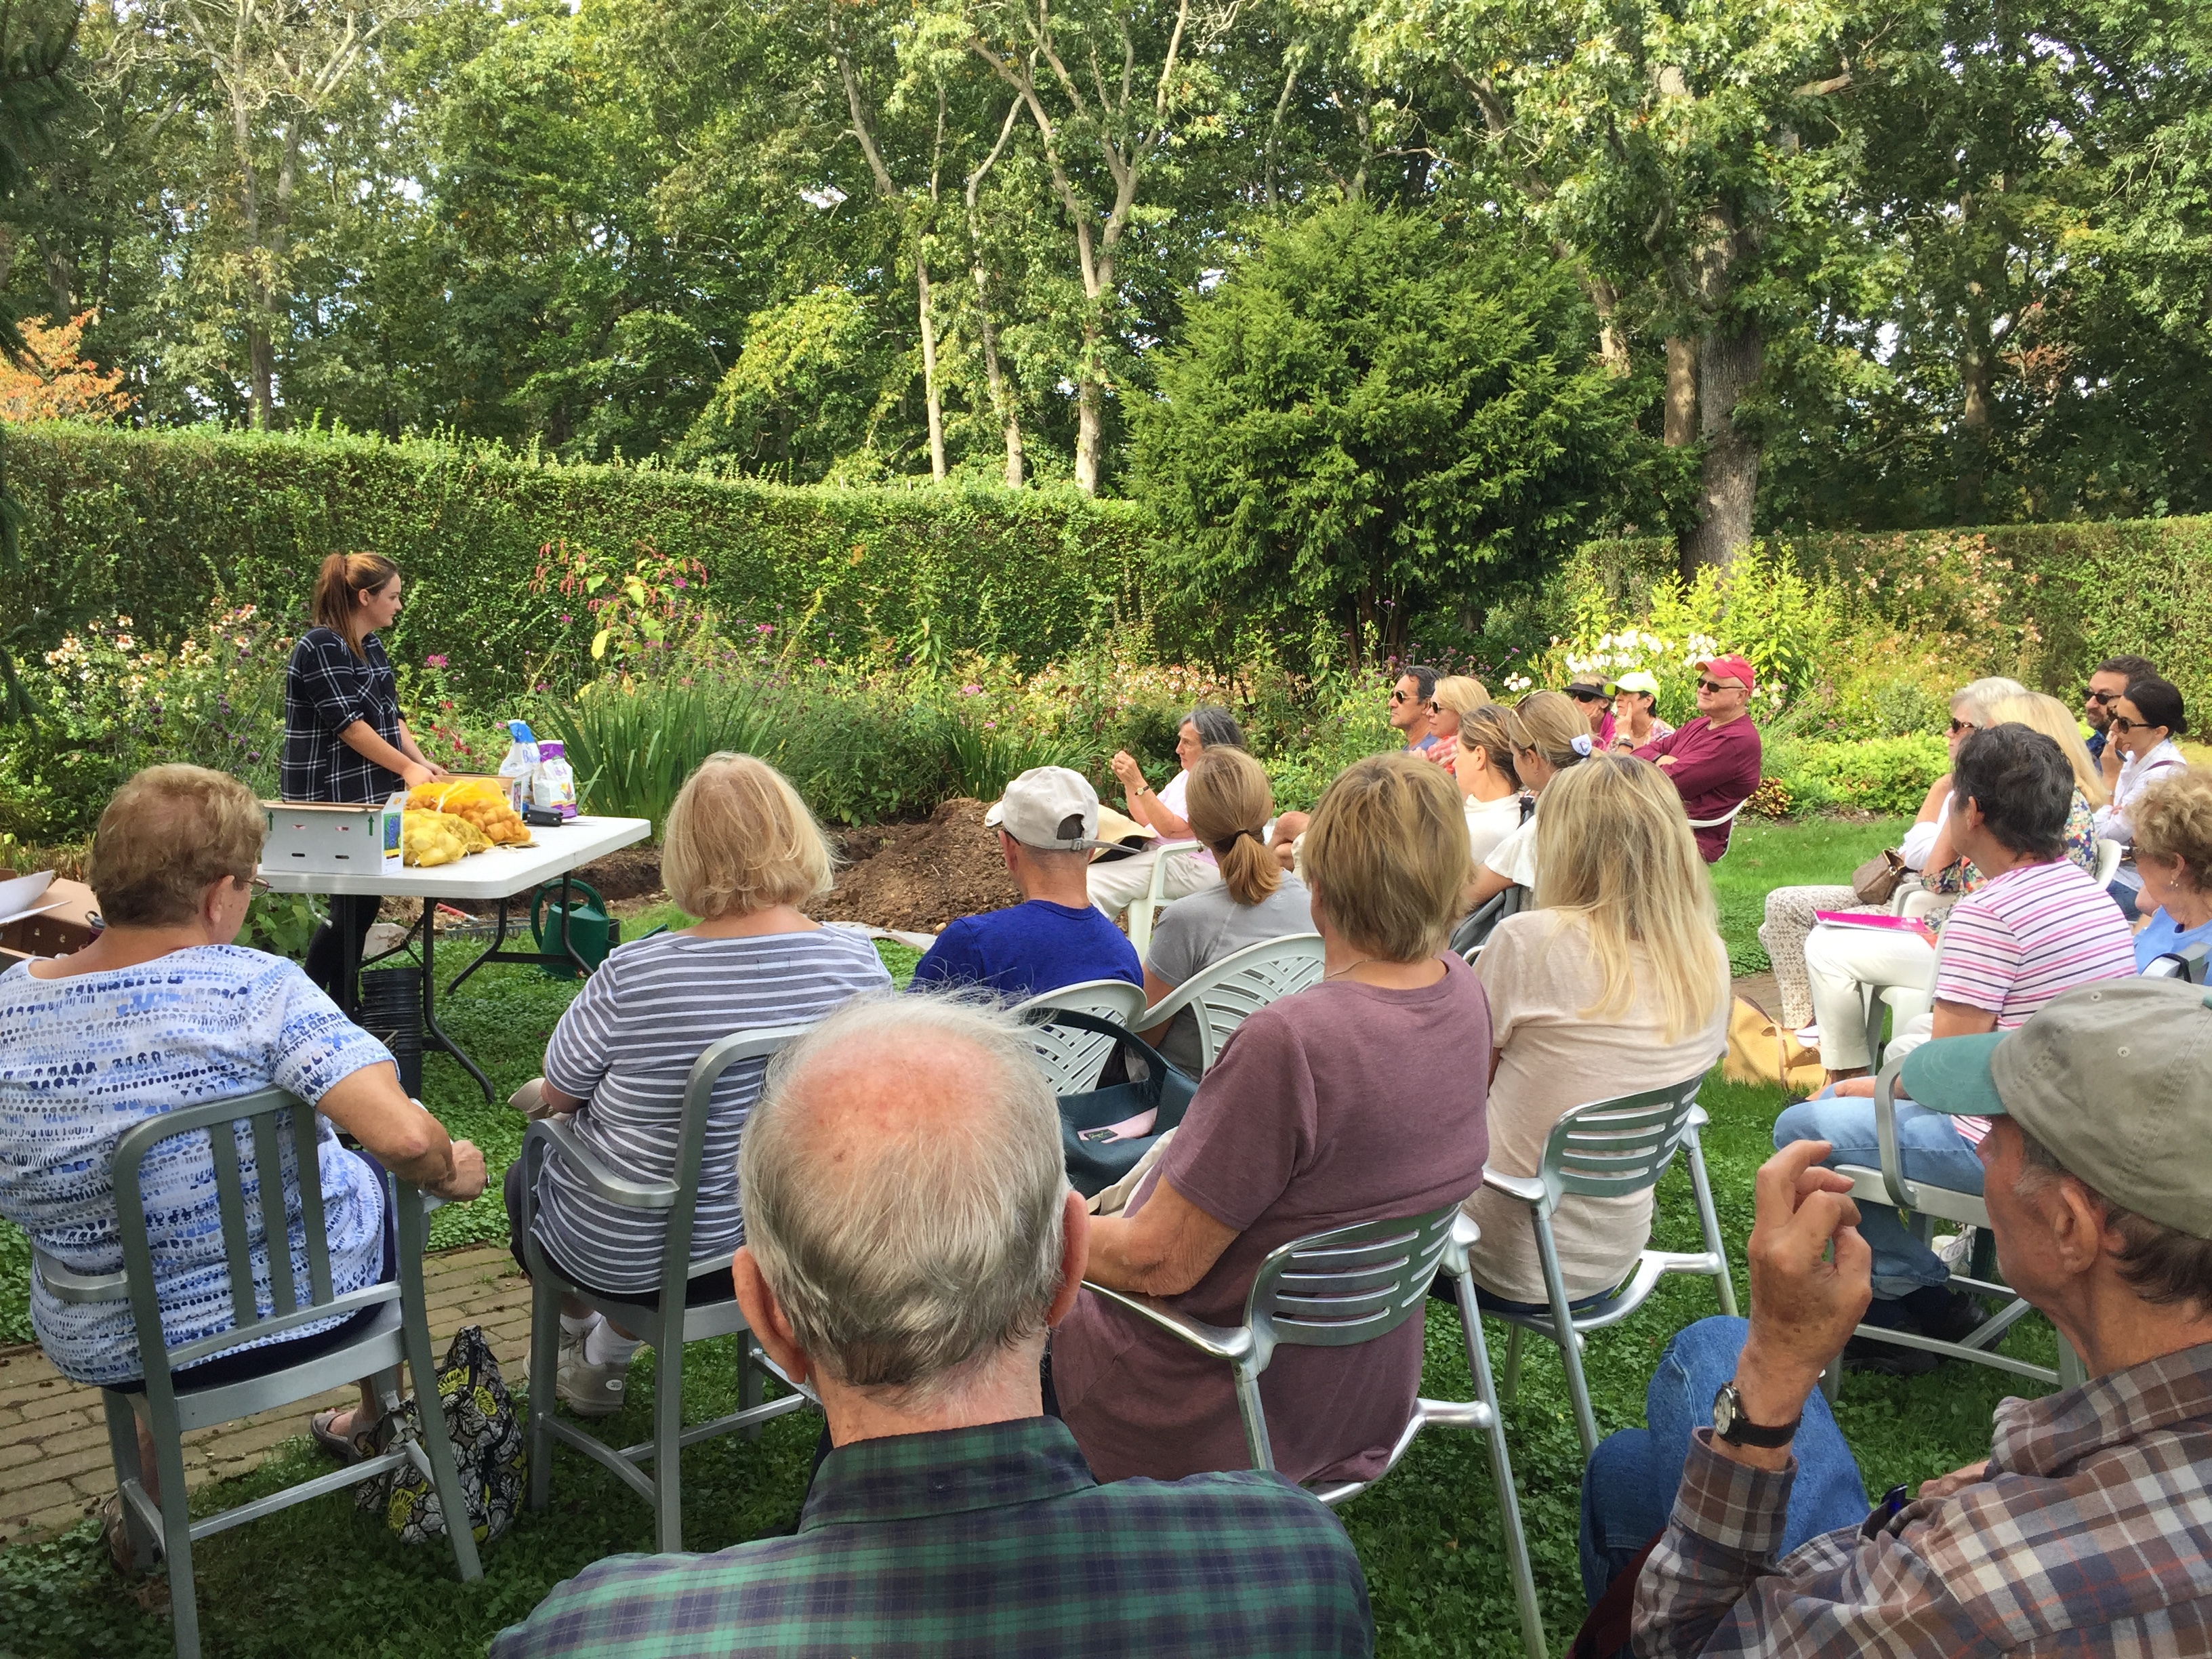 Planting bulbs talk with Summerhill Landscapes